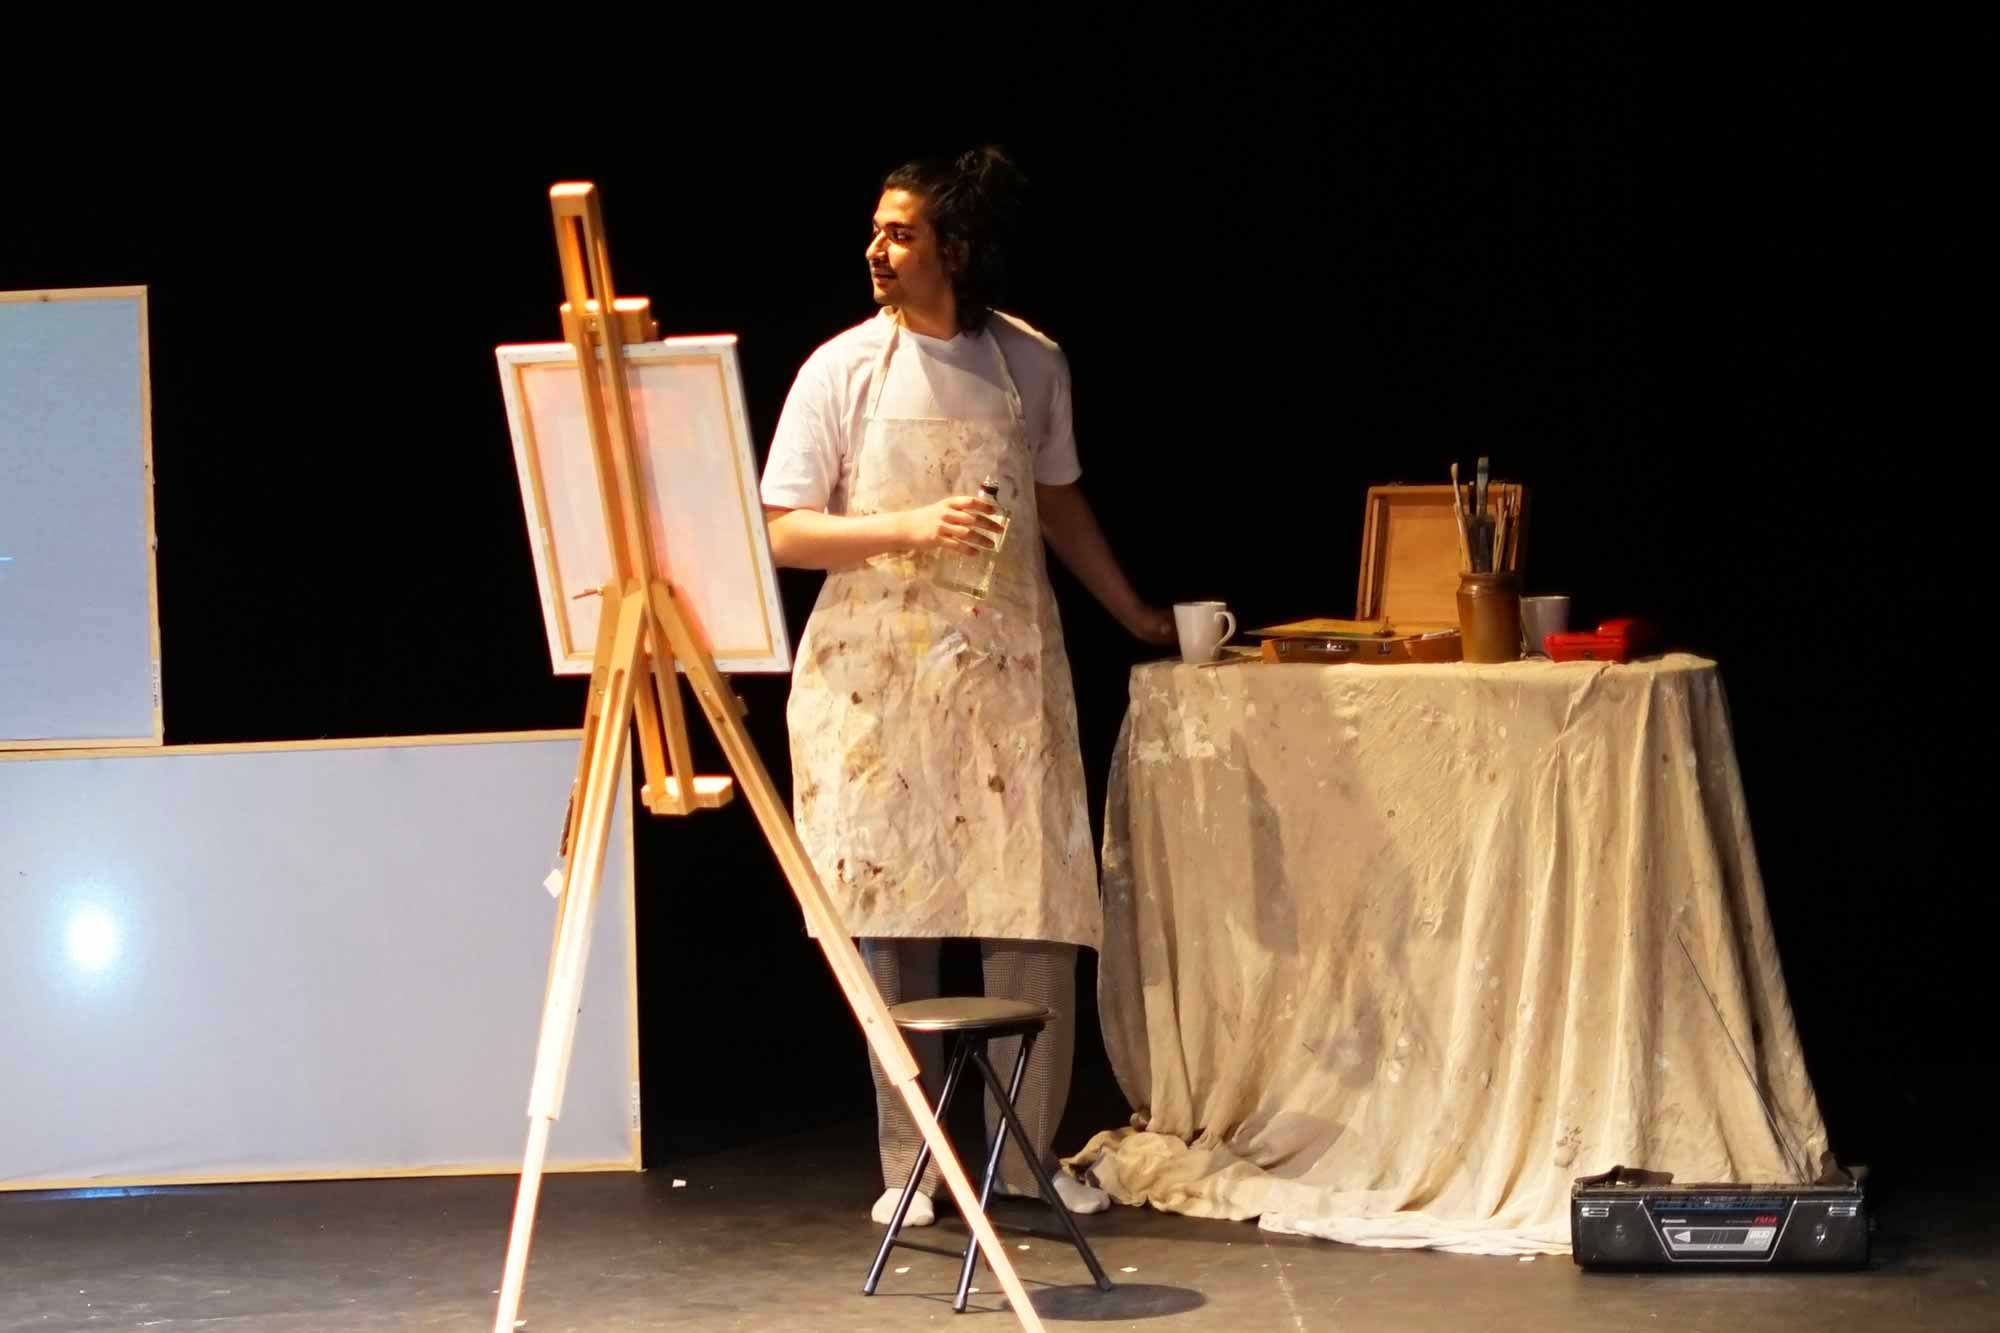 A male artist wearing an apron is looking to the side of his easel by his table of paints